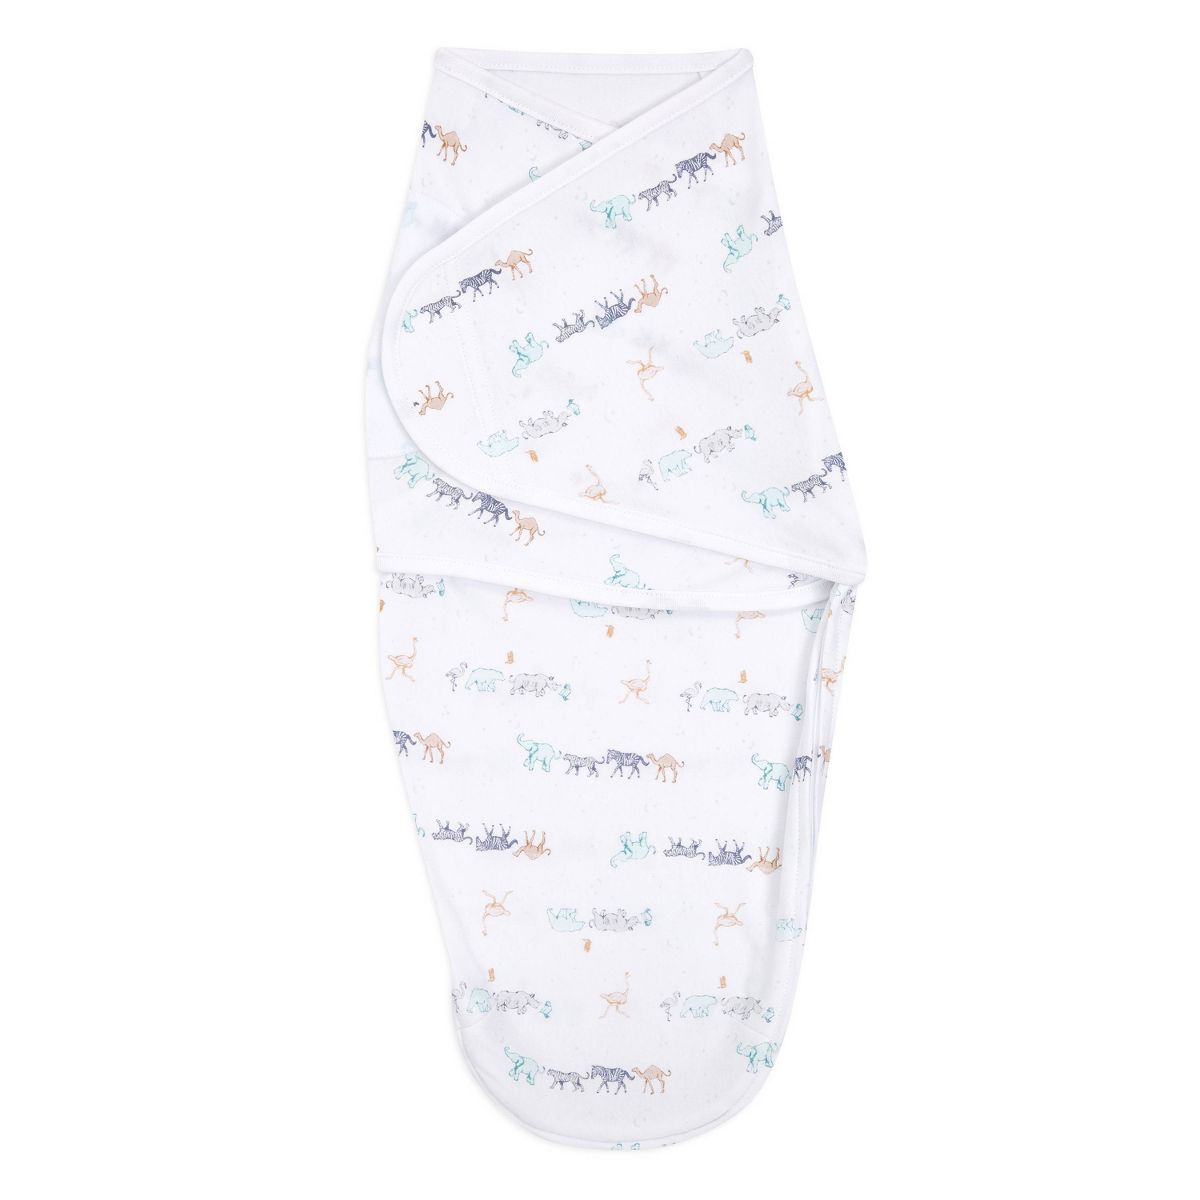 aden + anais Essentials Easy Swaddle Wrap - 0-3 Months - 5pk | Target